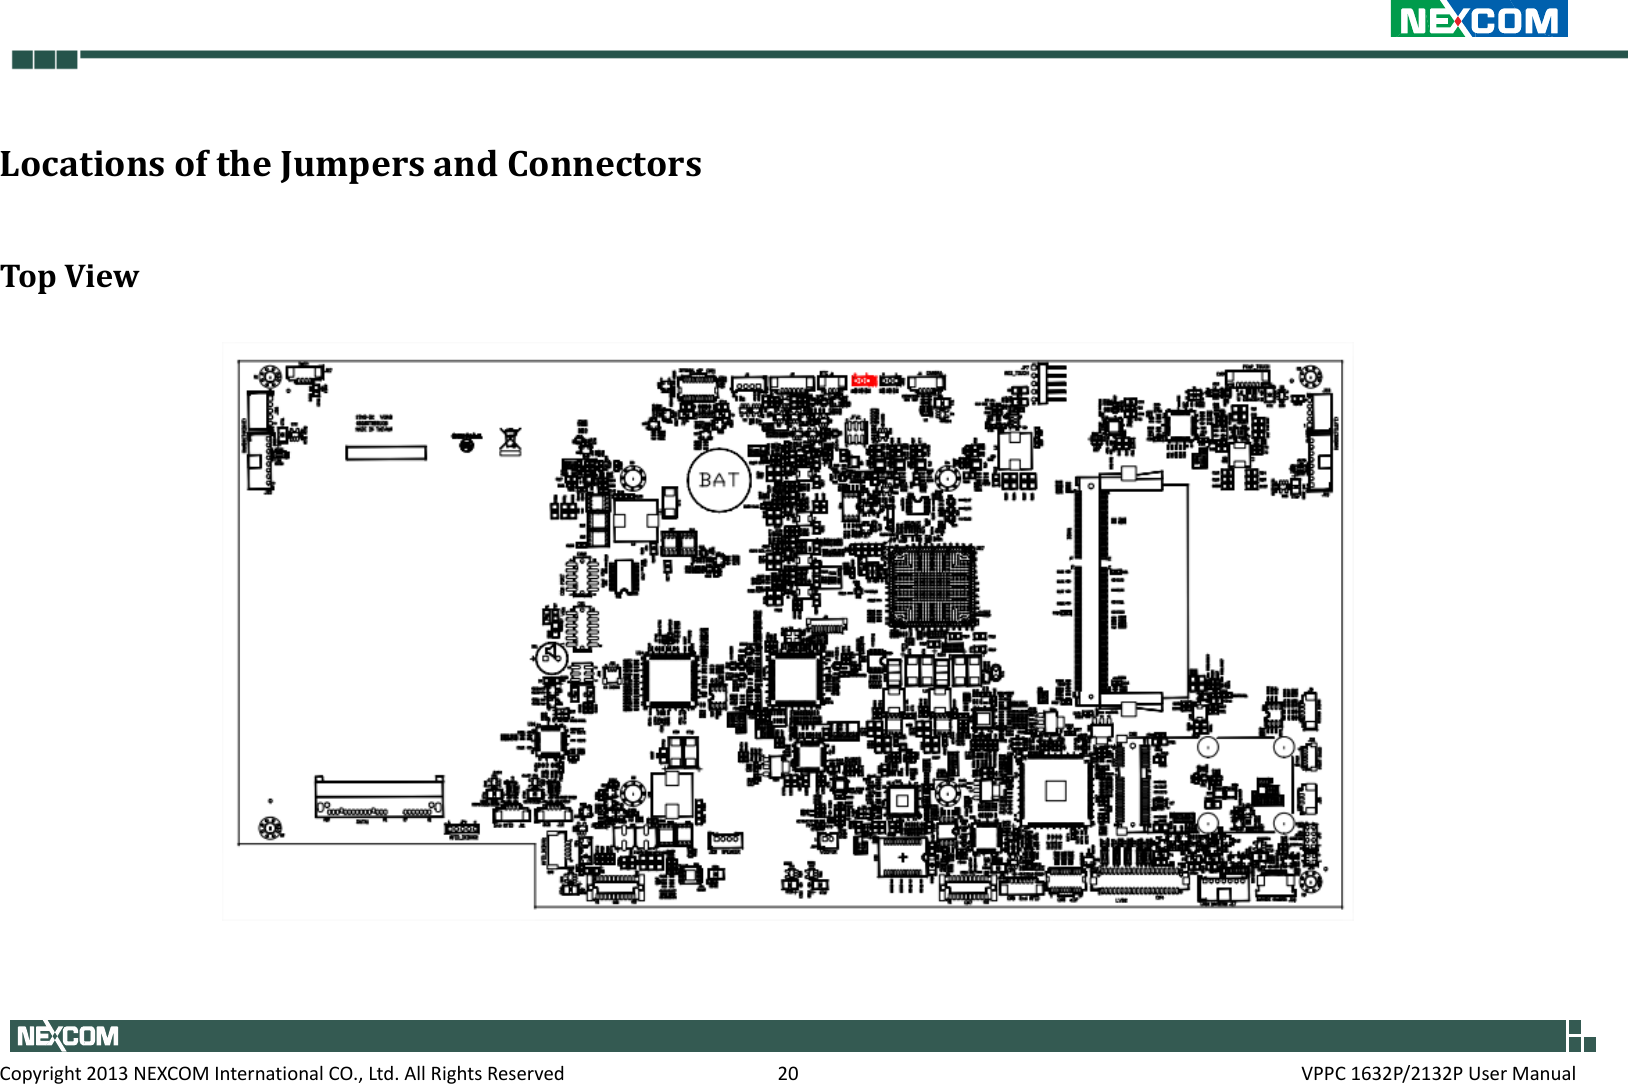     Copyright 2013 NEXCOM International CO., Ltd. All Rights Reserved  20  VPPC 1632P/2132P User Manual Locations of the Jumpers and Connectors Top View  